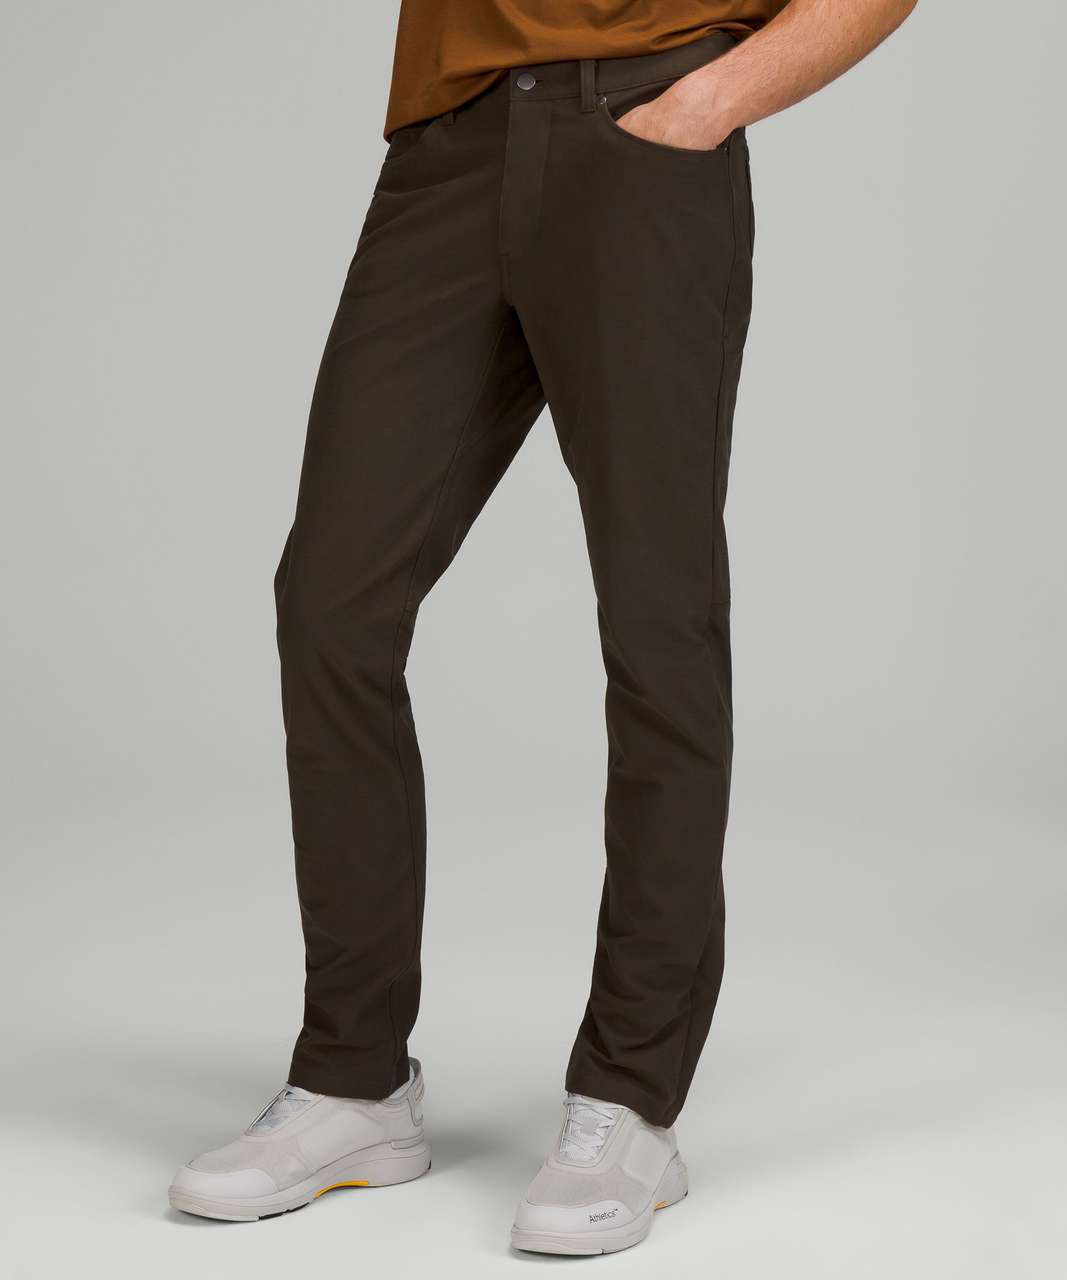 Daily Outfit Ideas: Lululemon ABC Classic-Fit Pant - Modern Future